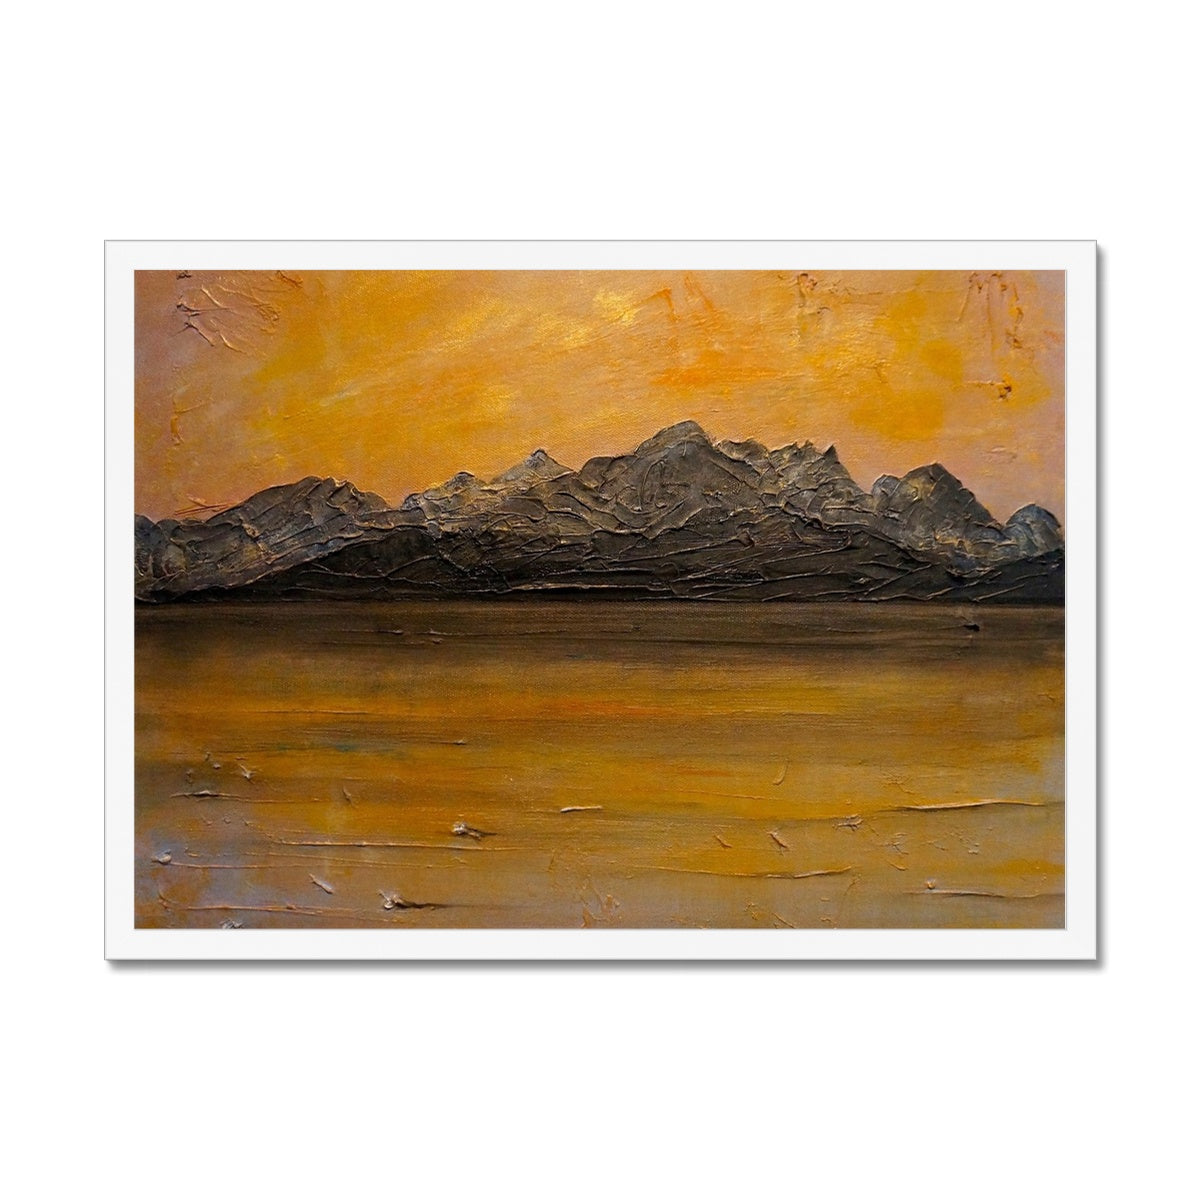 Cuillin Sunset Skye Painting | Framed Prints From Scotland-Framed Prints-Skye Art Gallery-A2 Landscape-White Frame-Paintings, Prints, Homeware, Art Gifts From Scotland By Scottish Artist Kevin Hunter